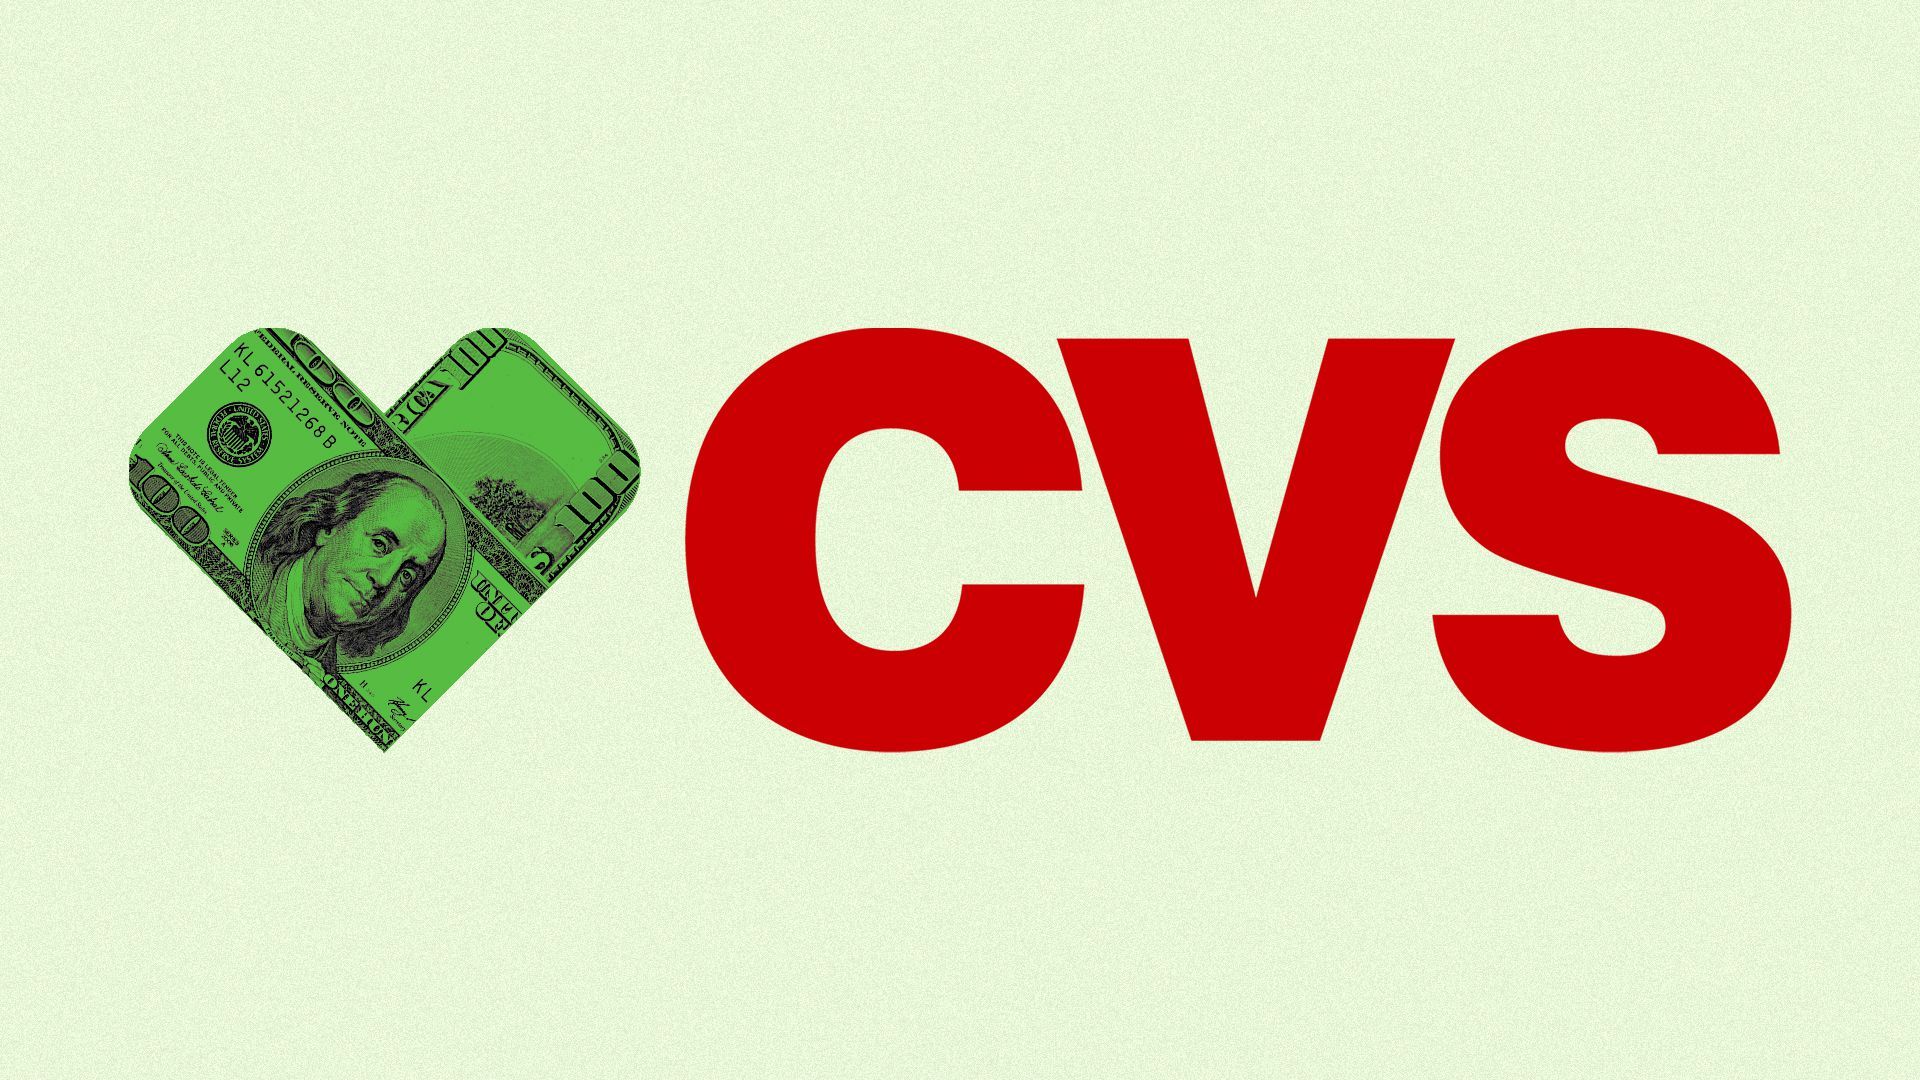 Illustration of the CVS logo with dollar bills forming the heart.